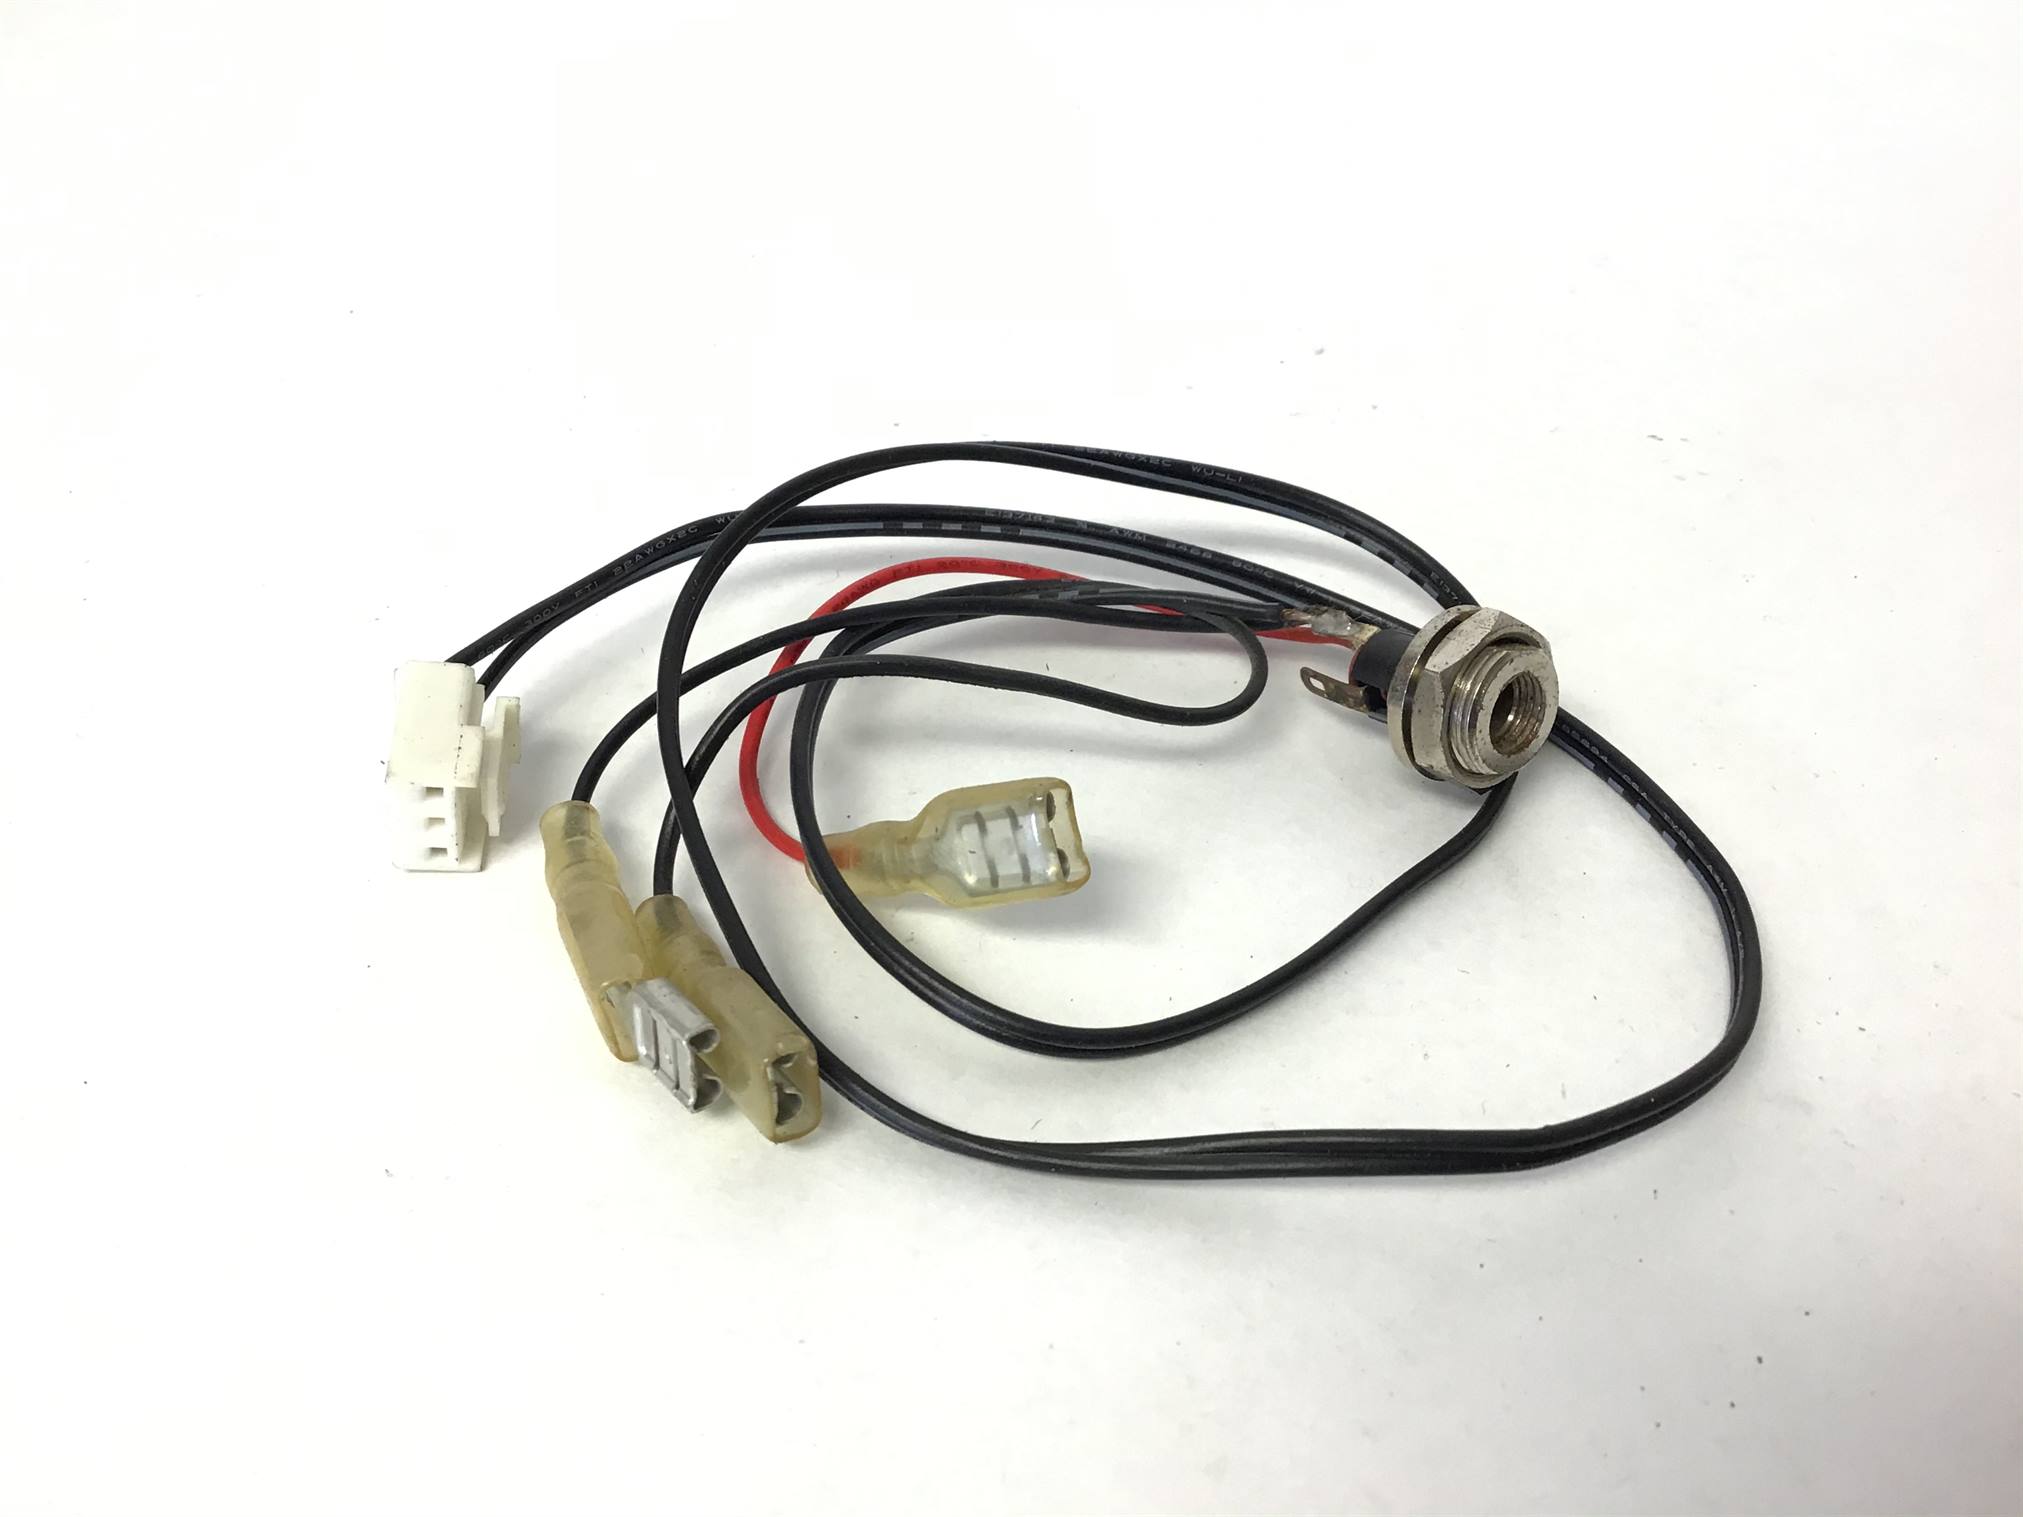 Power Entry Wire Set (Used)